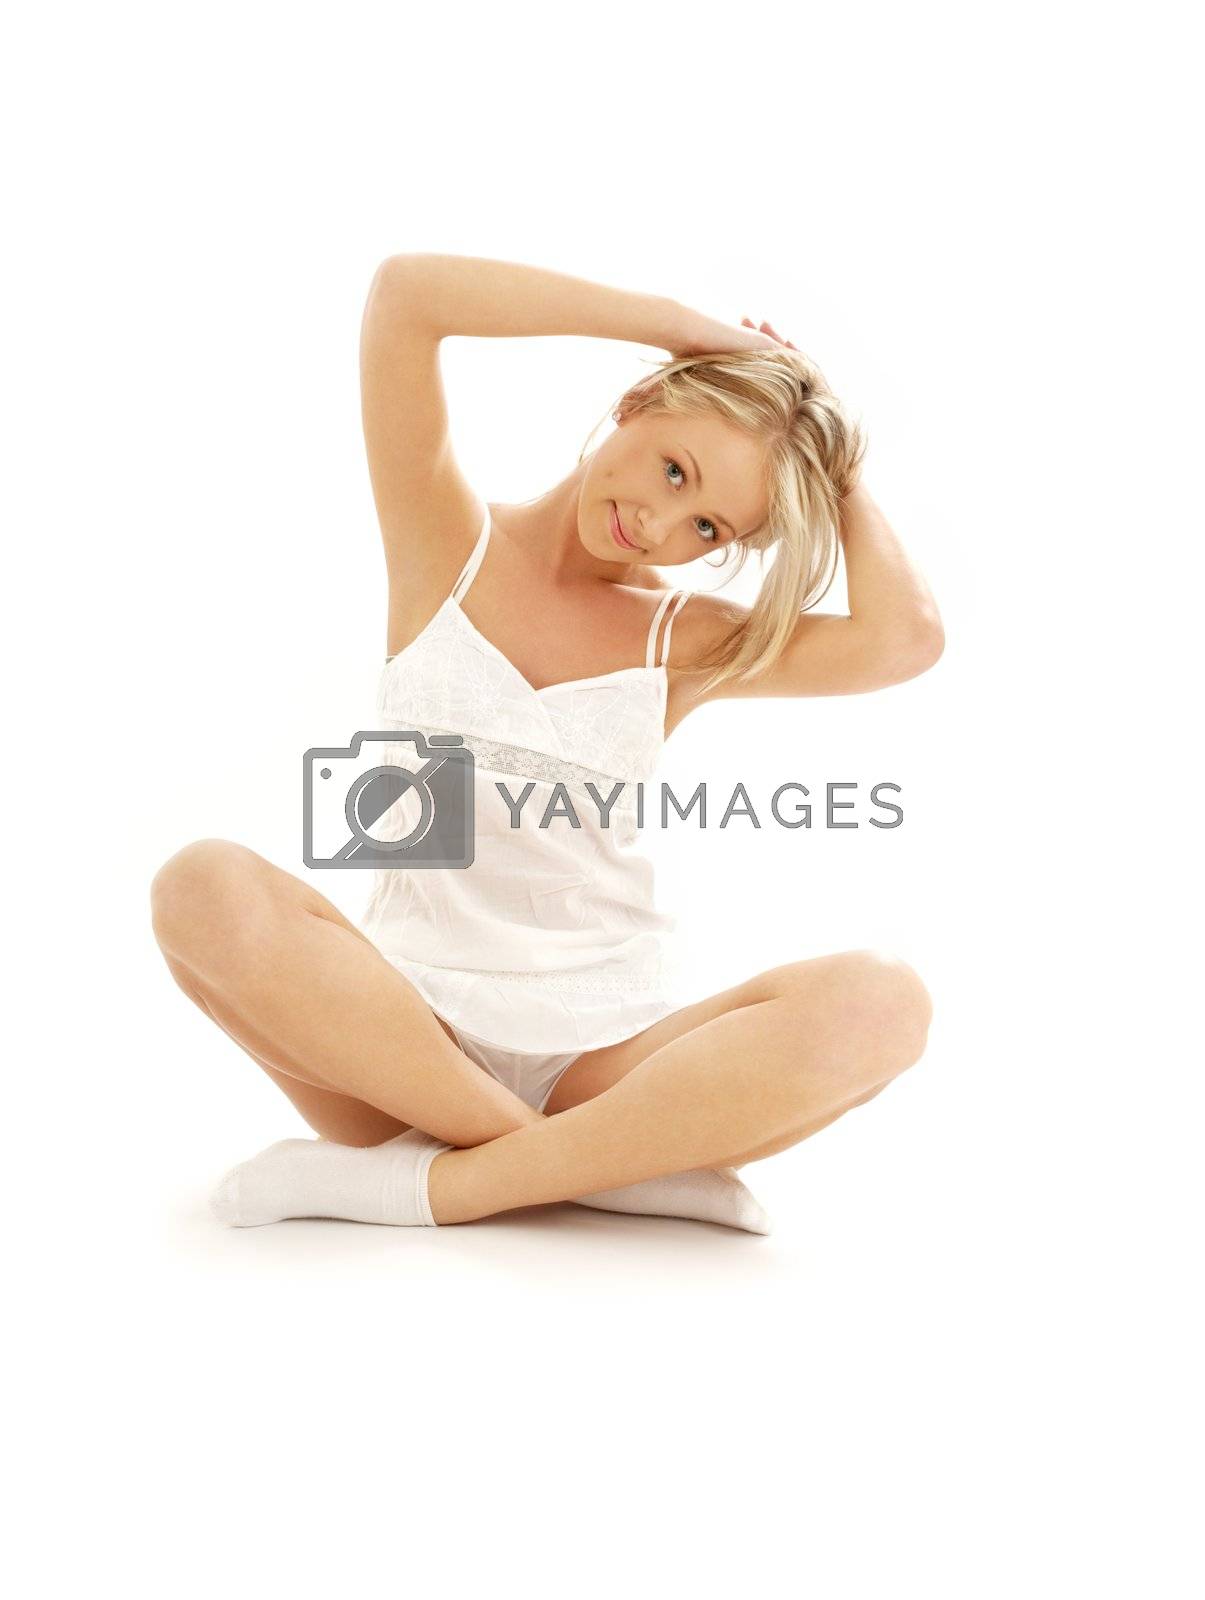 Royalty free image of lovely girl working out over white by dolgachov